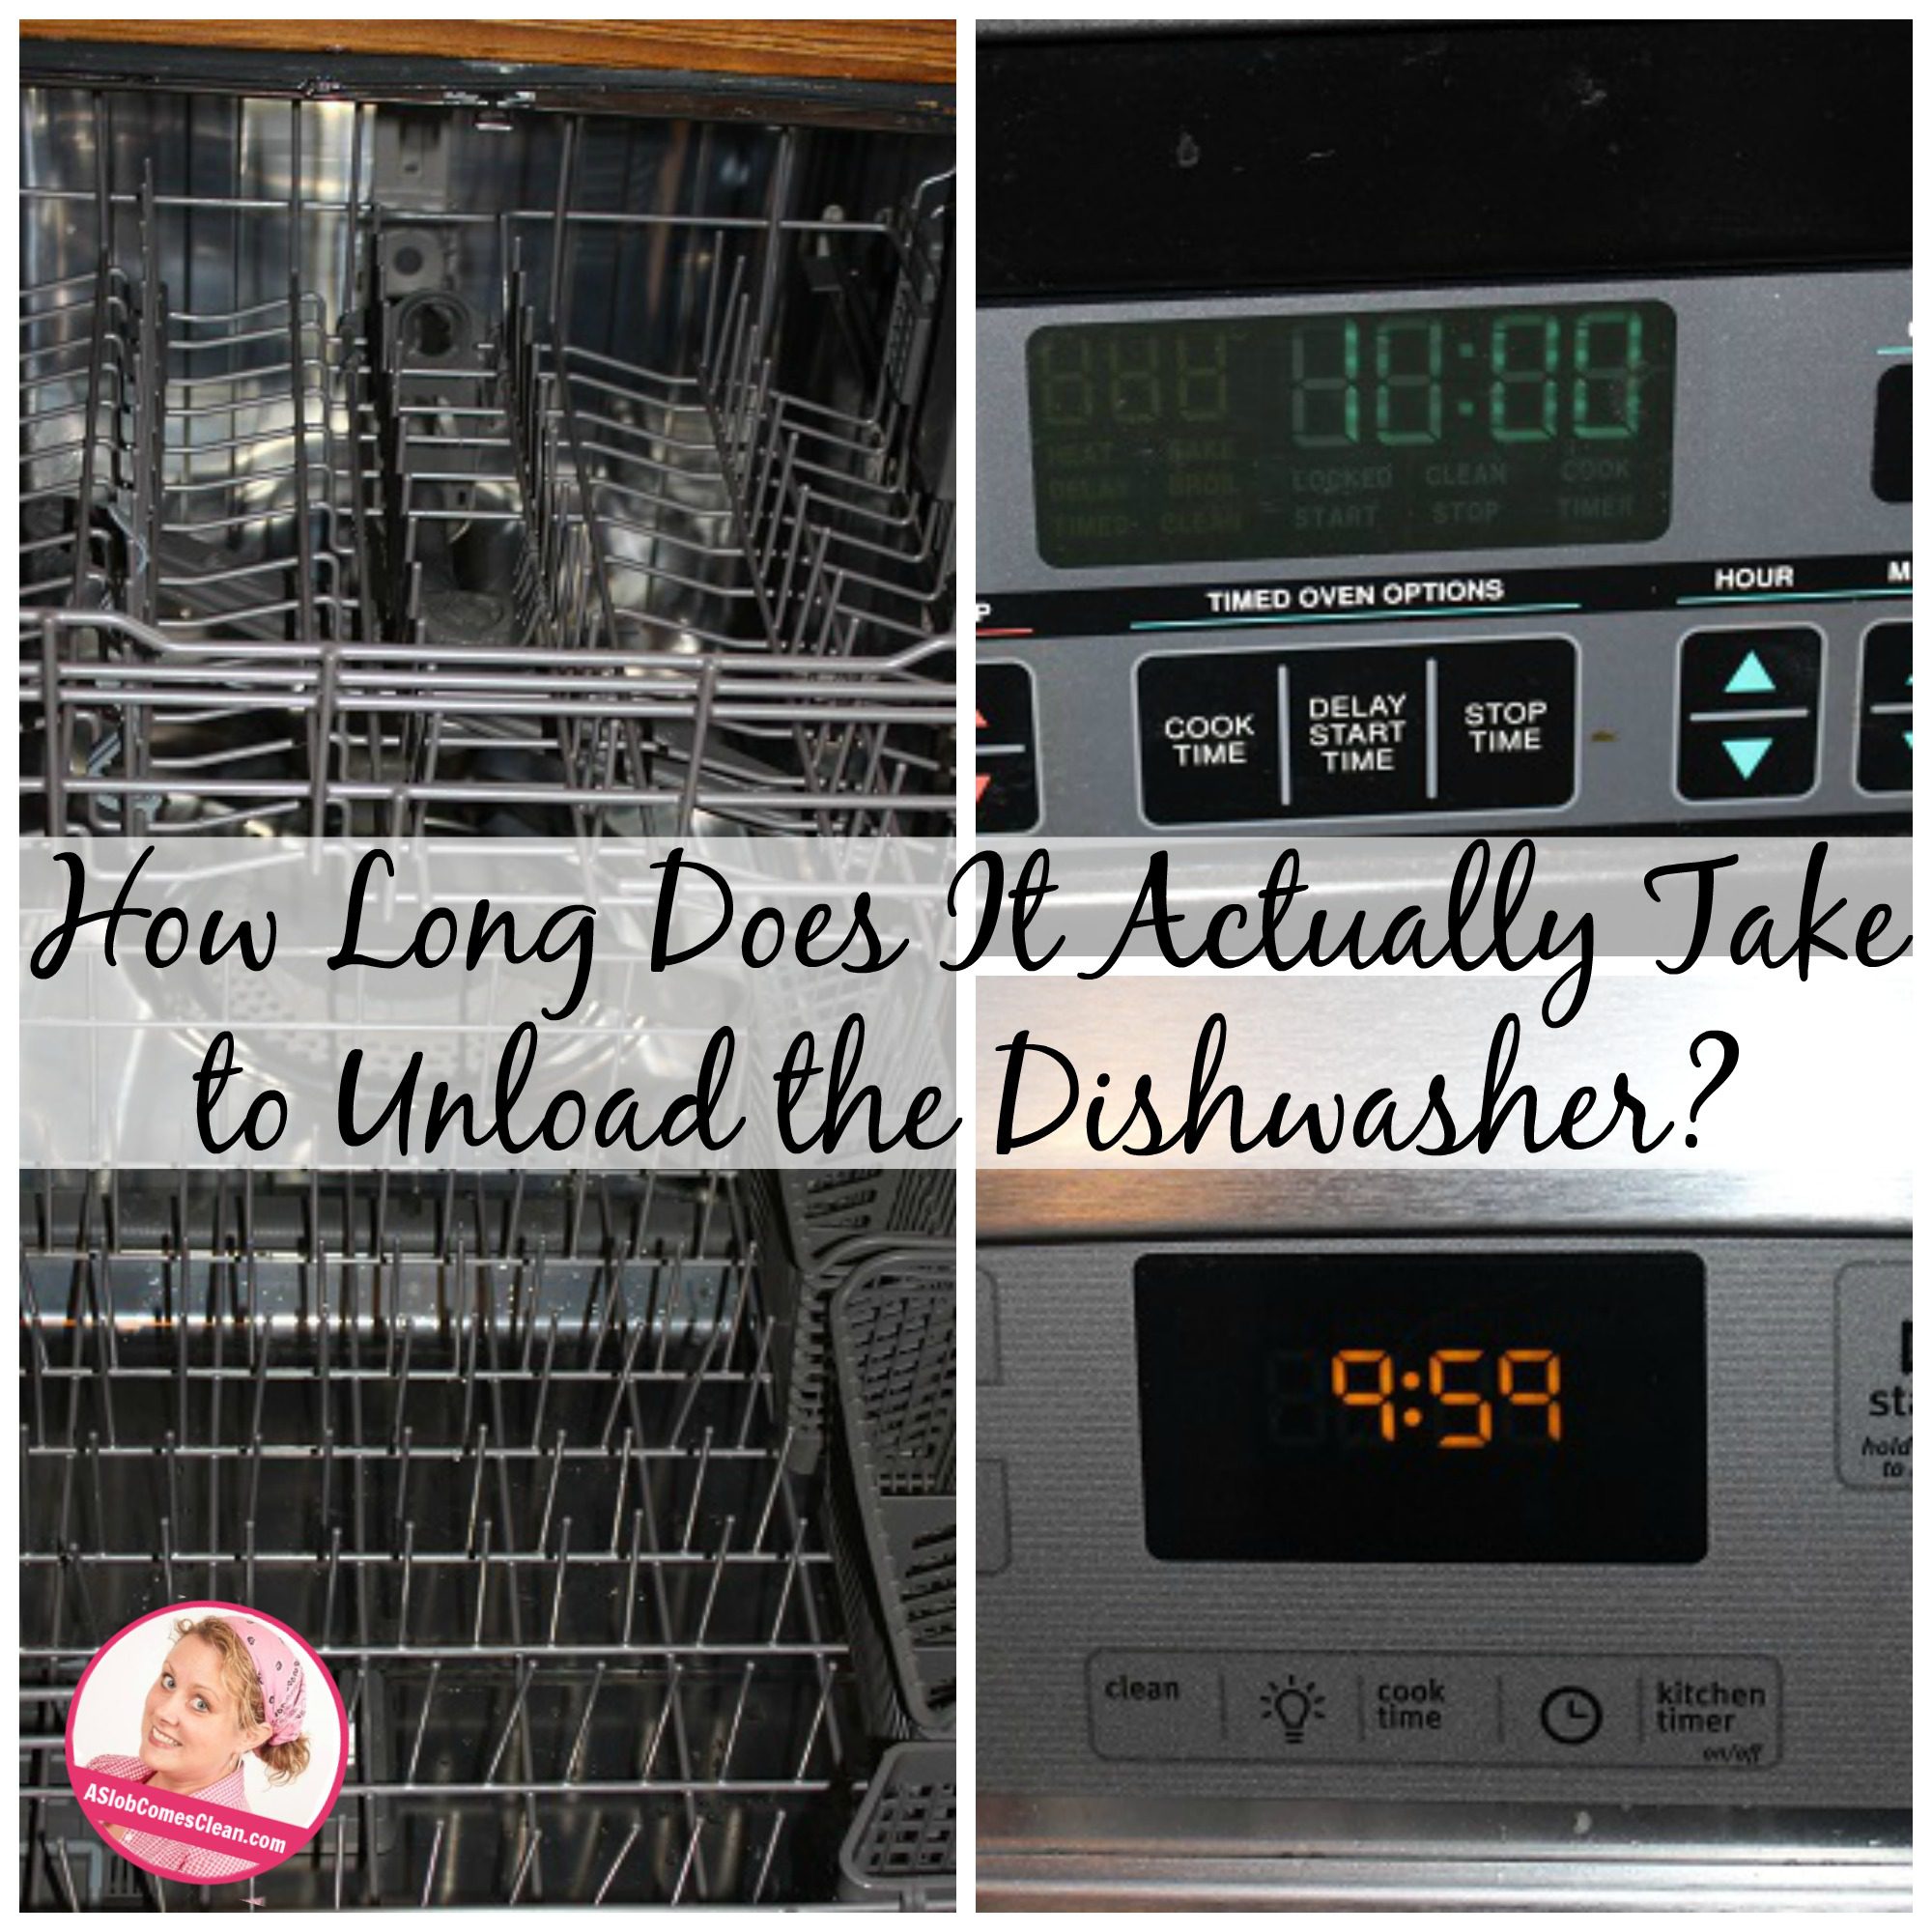 It only took me less than 5 minutes to unload the dishwasher at ASlobComesClean.com